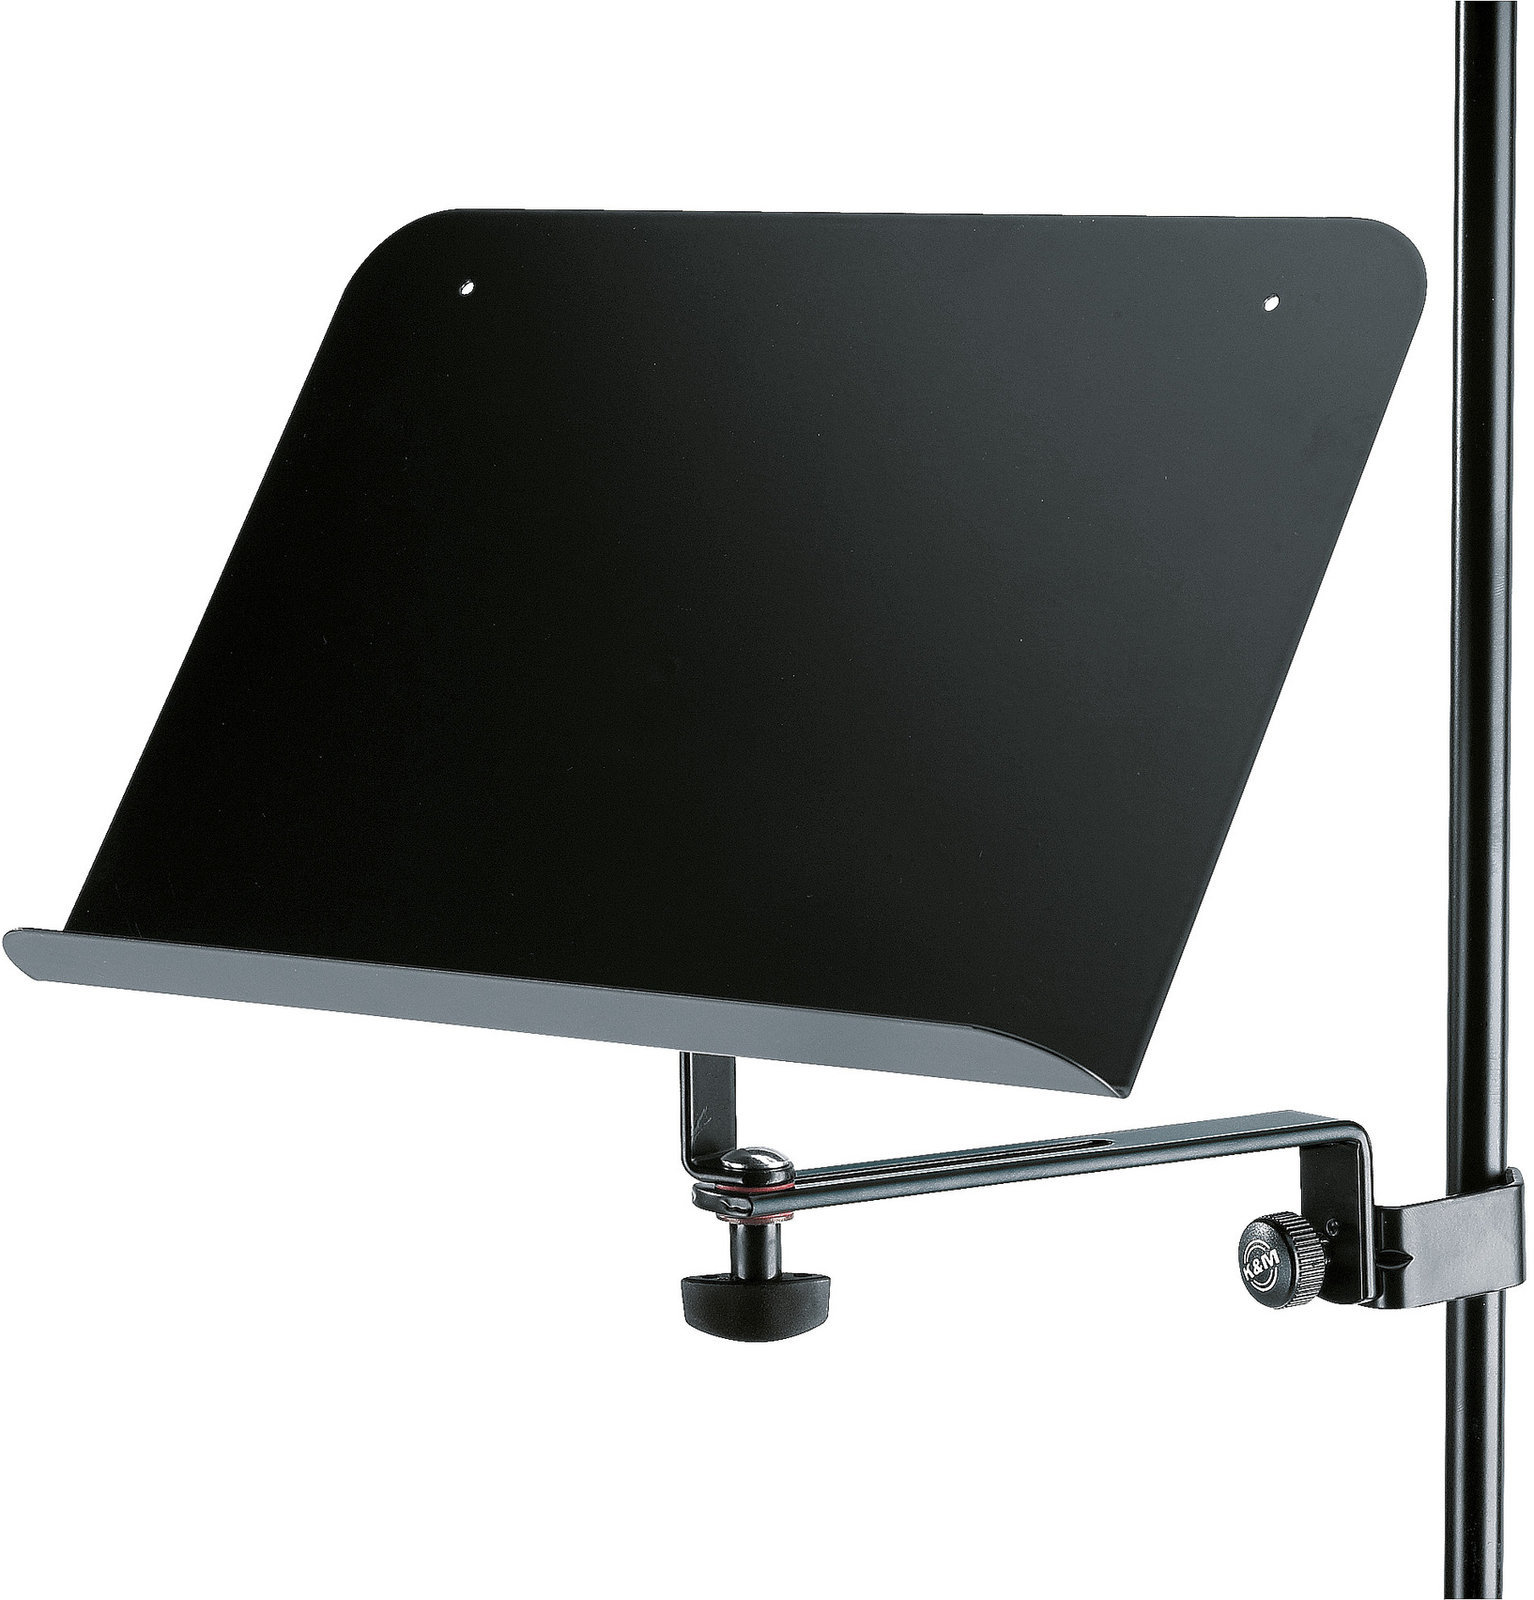 Accessorie for music stands Konig & Meyer 11520 Accessorie for music stands